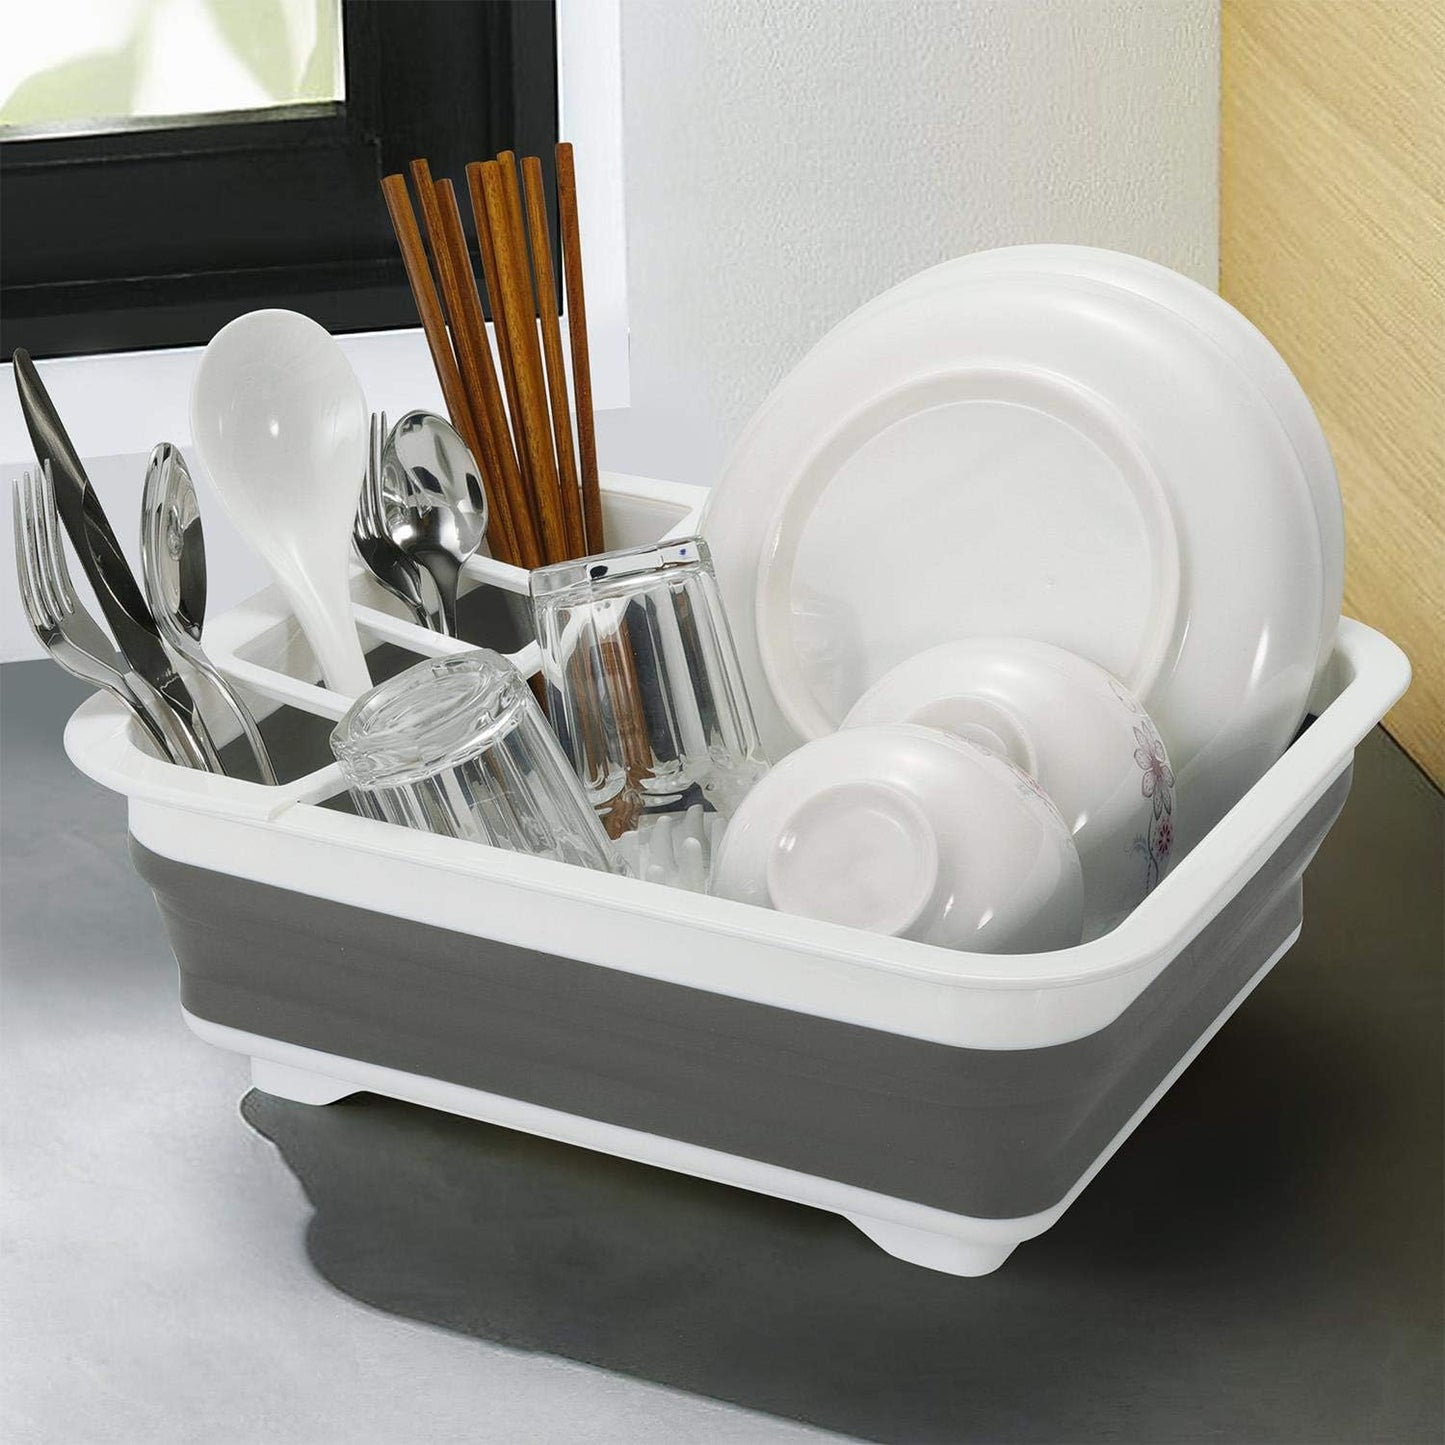 Collapsible Kitchen Dish Drying Rack